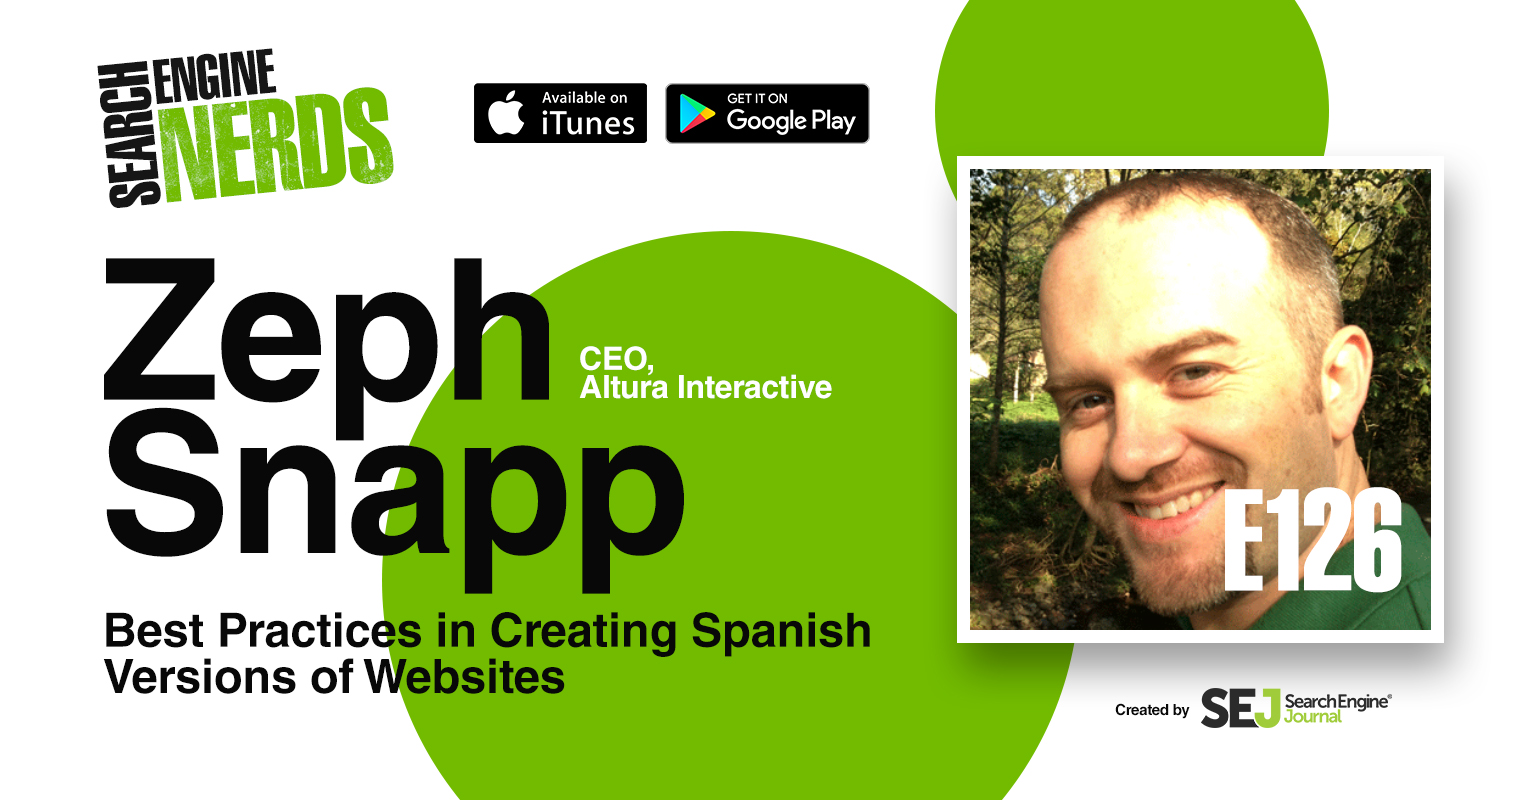 What Are The Best Practices in Creating Spanish Versions of Websites? [PODCAST]